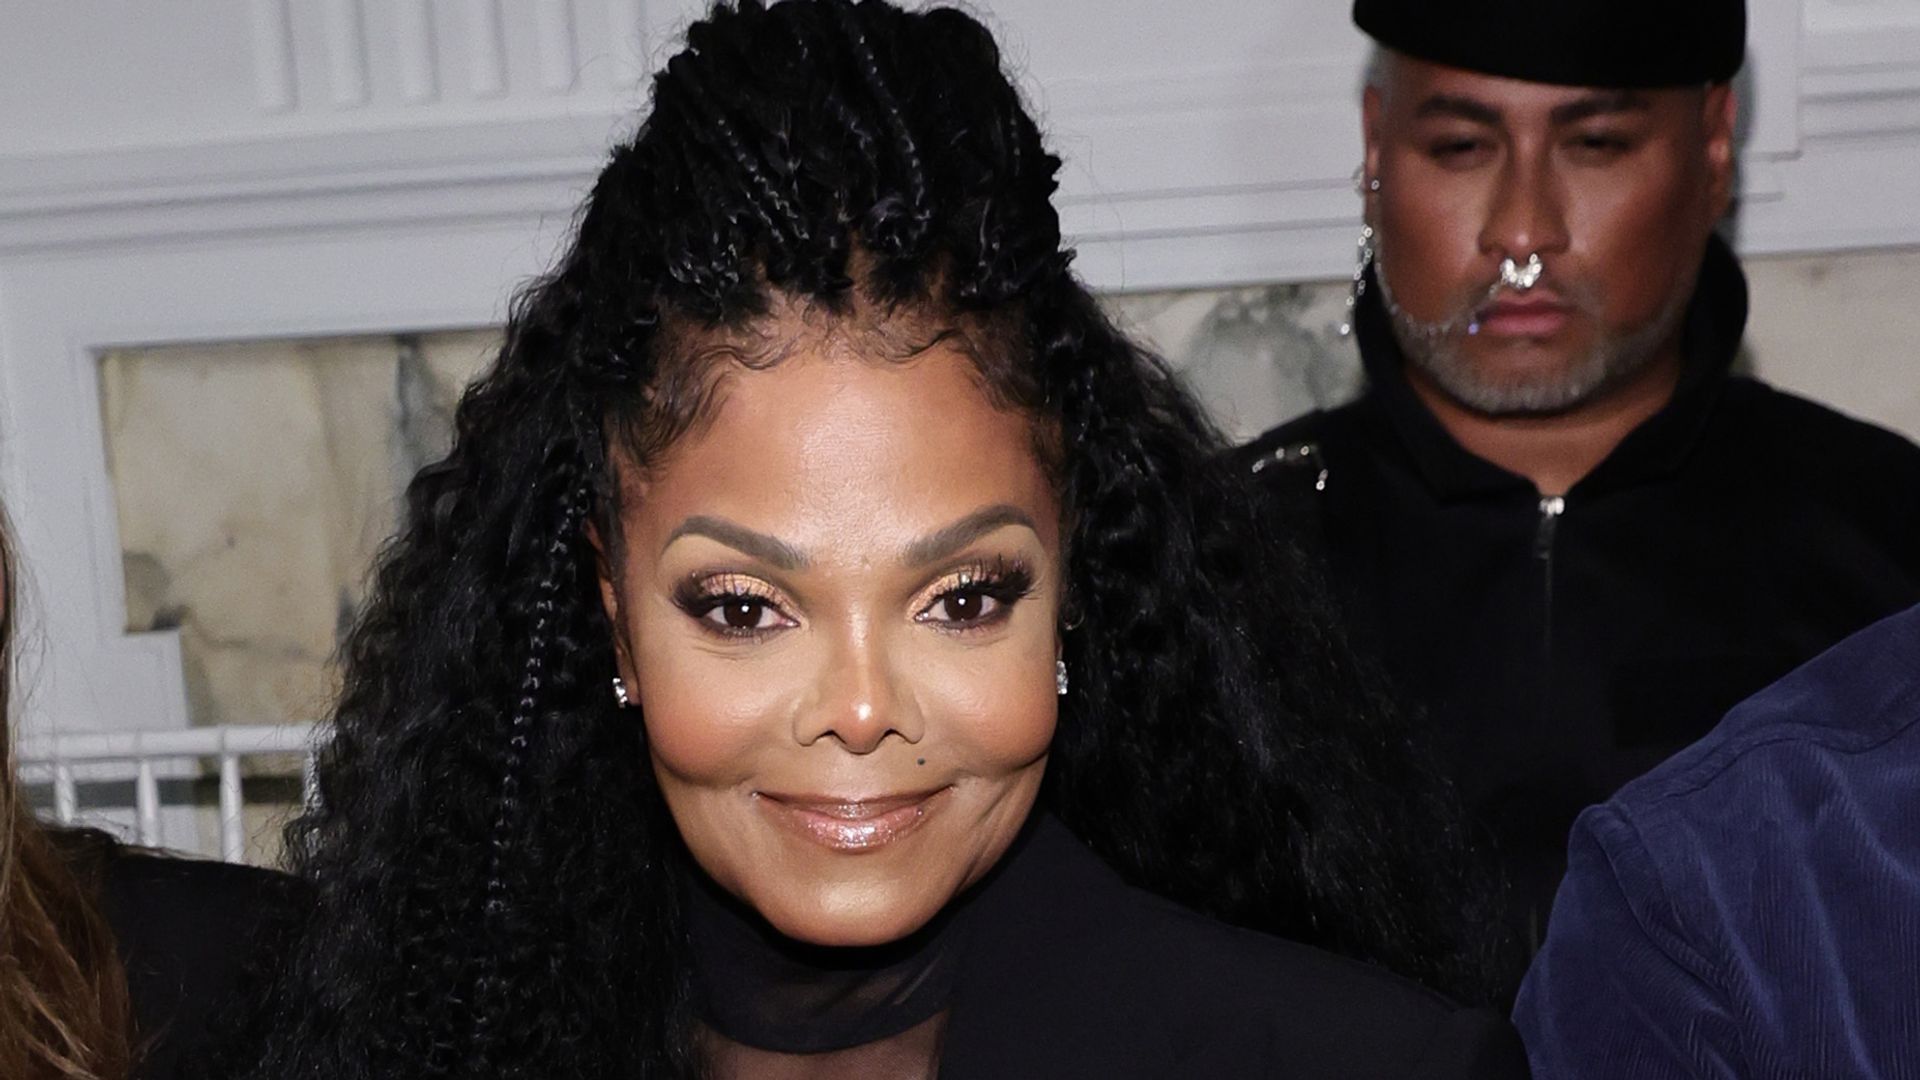 Janet Jackson's appearance at 58 leaves fans stunned